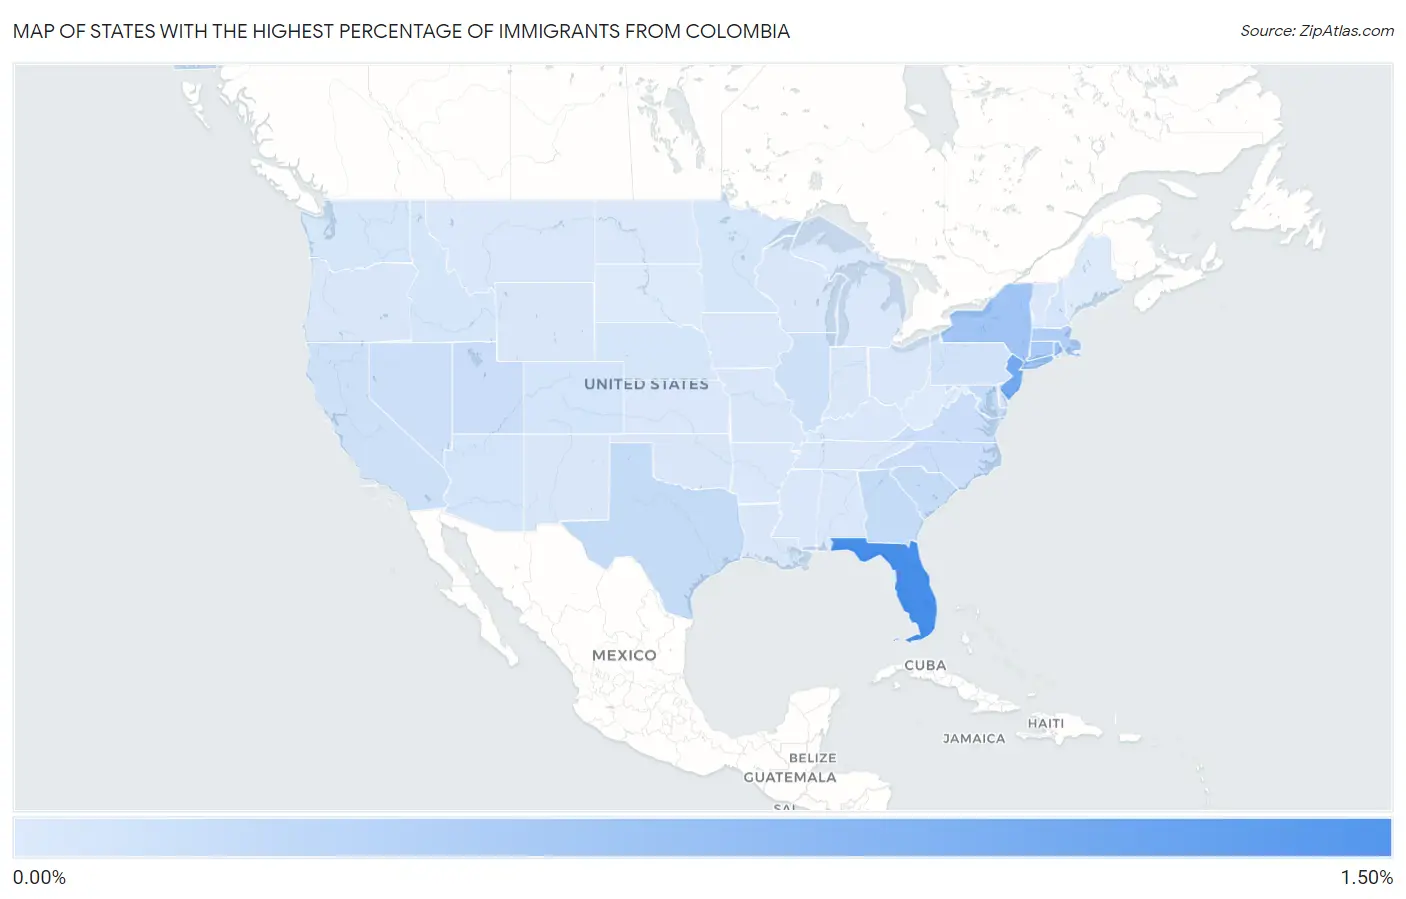 States with the Highest Percentage of Immigrants from Colombia in the United States Map